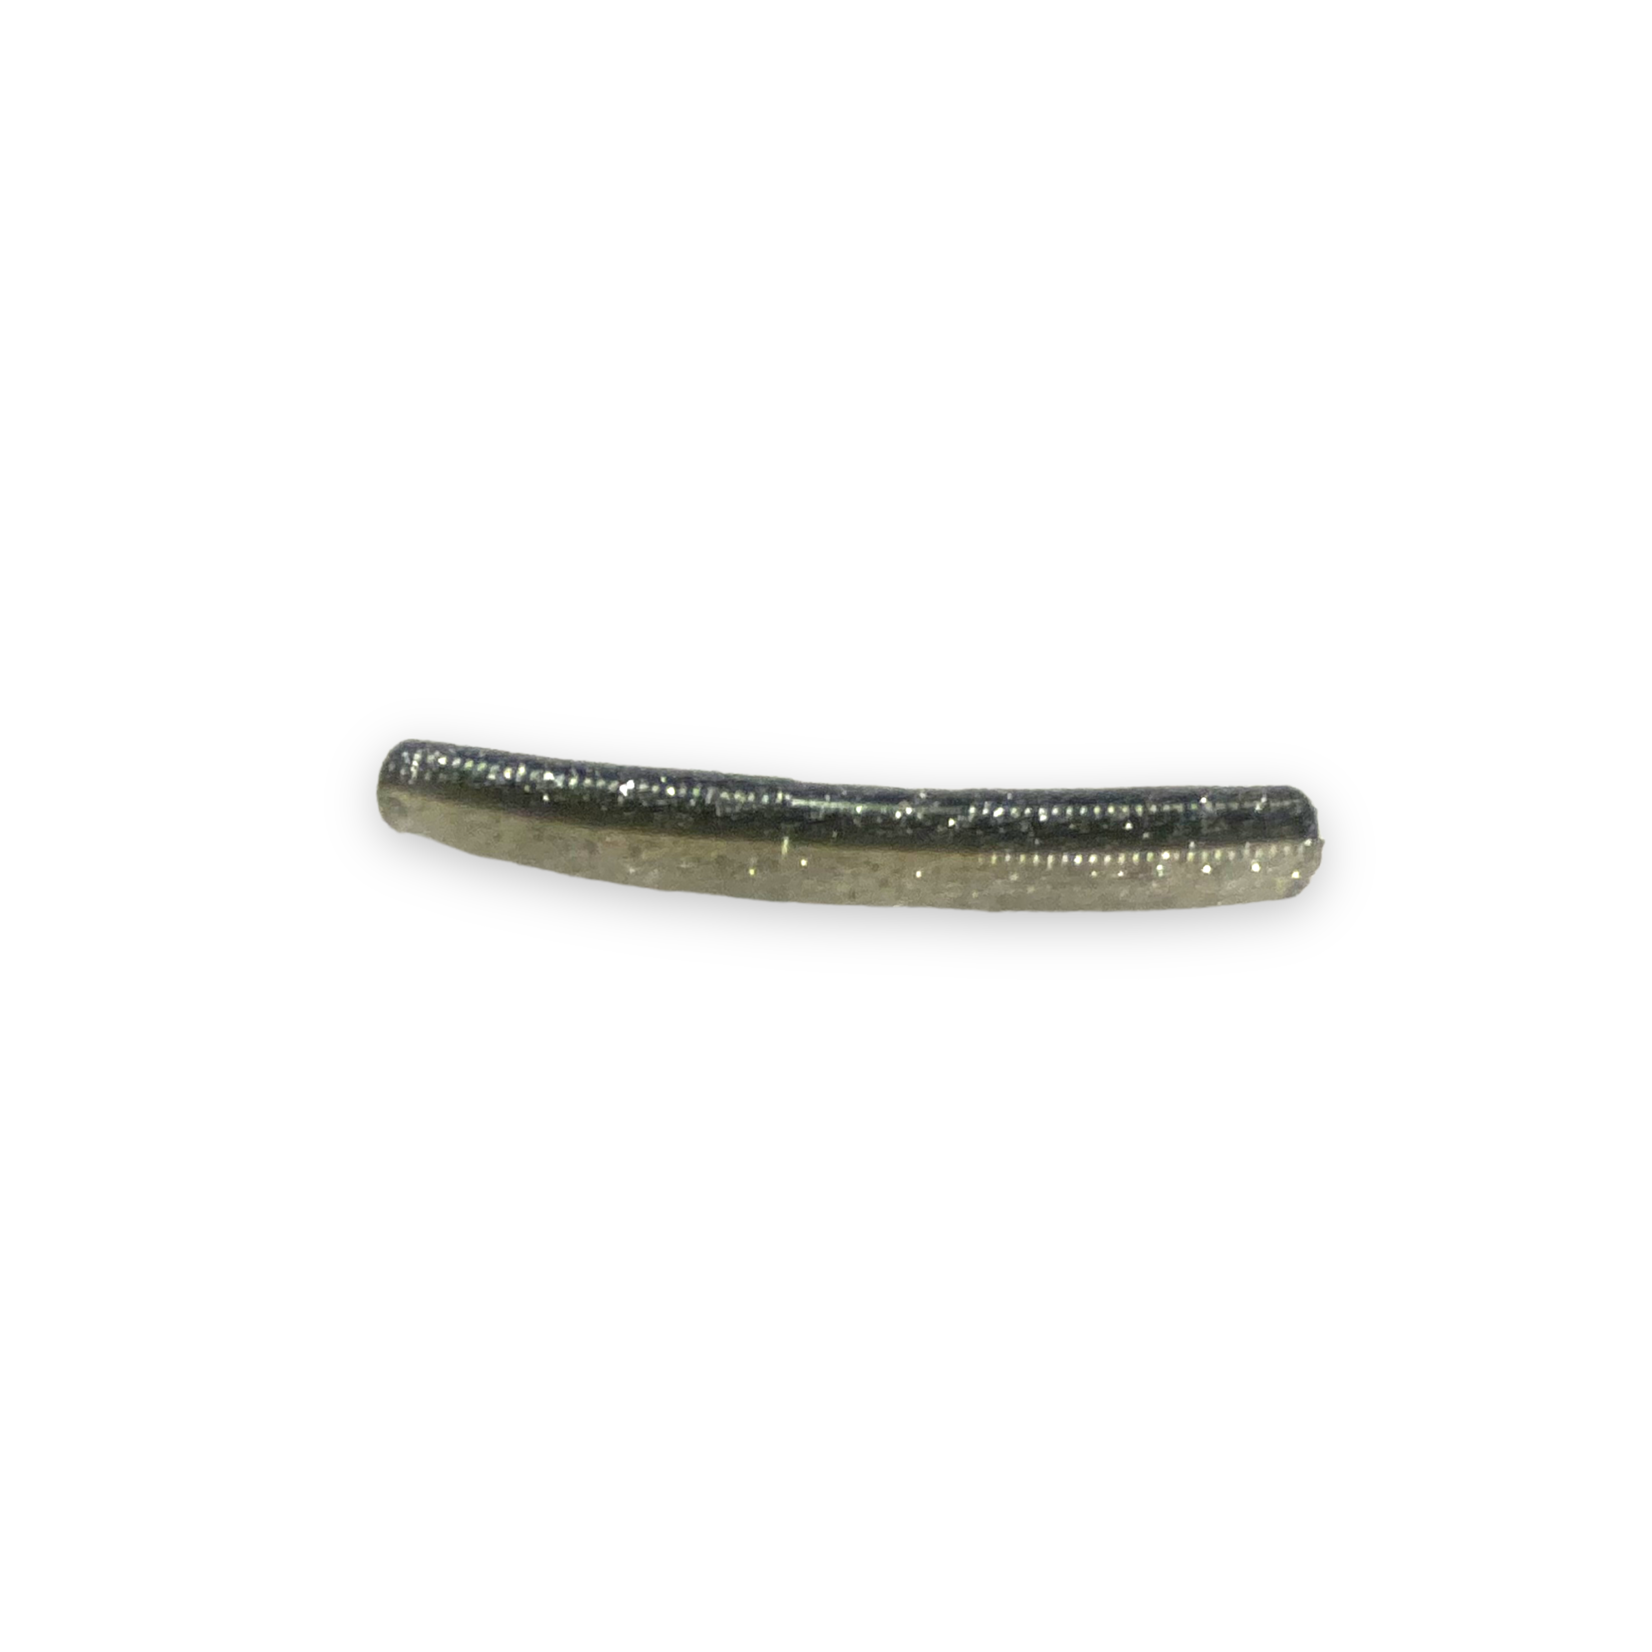 Un-Reel Floating Ned Worm 2.75"